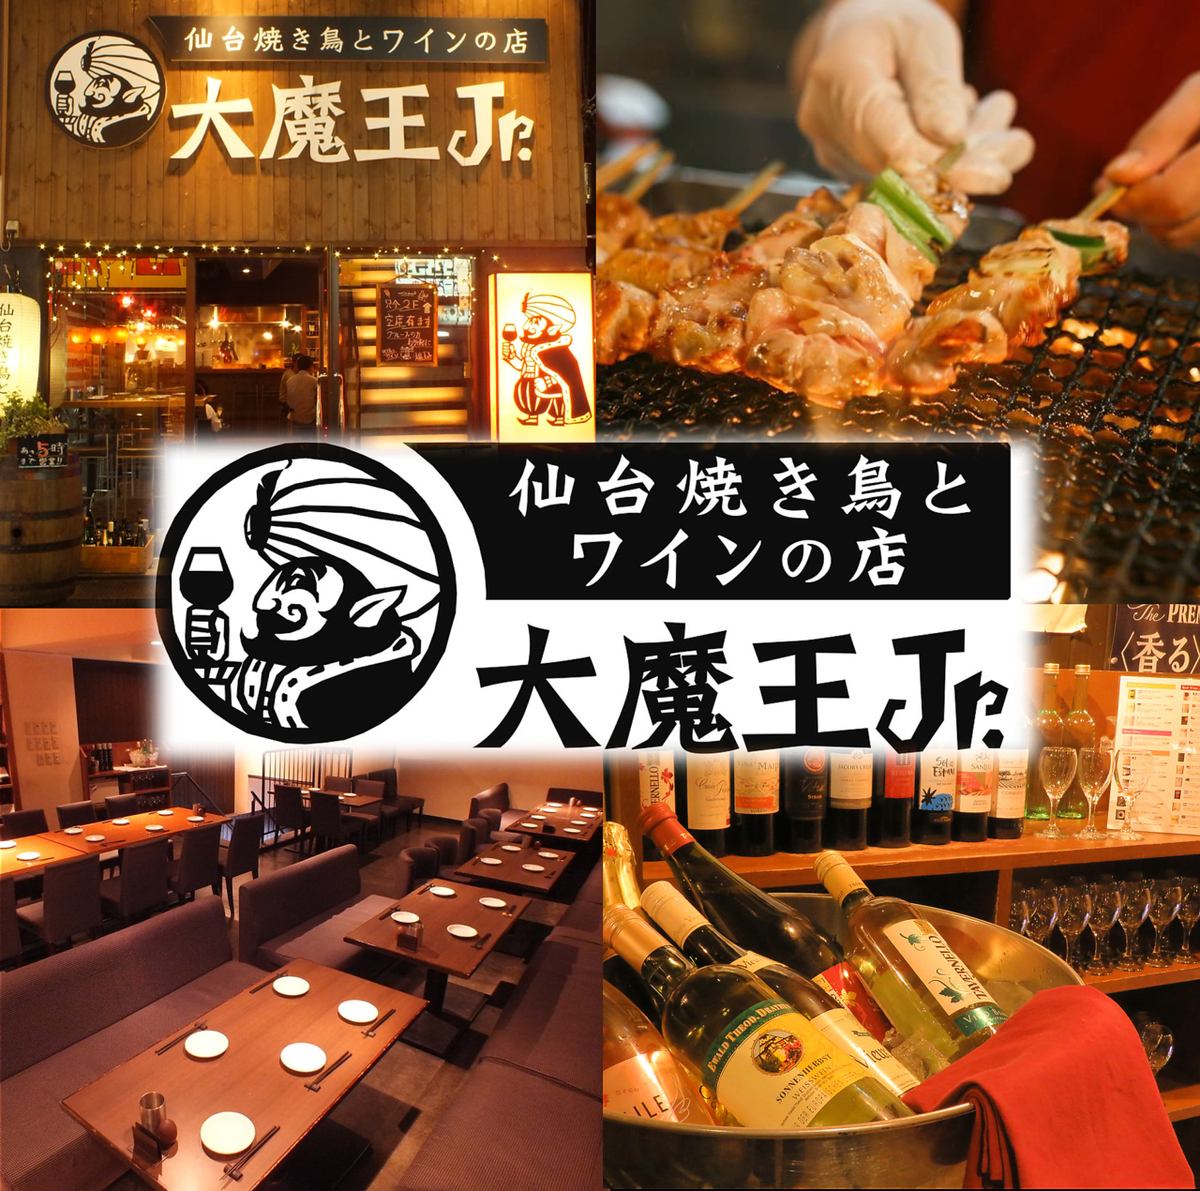 Private banquets are welcome on the 2nd floor ♪ Great location in Kokubuncho ♪ Large parties can be held at Daimaou Jr. ♪